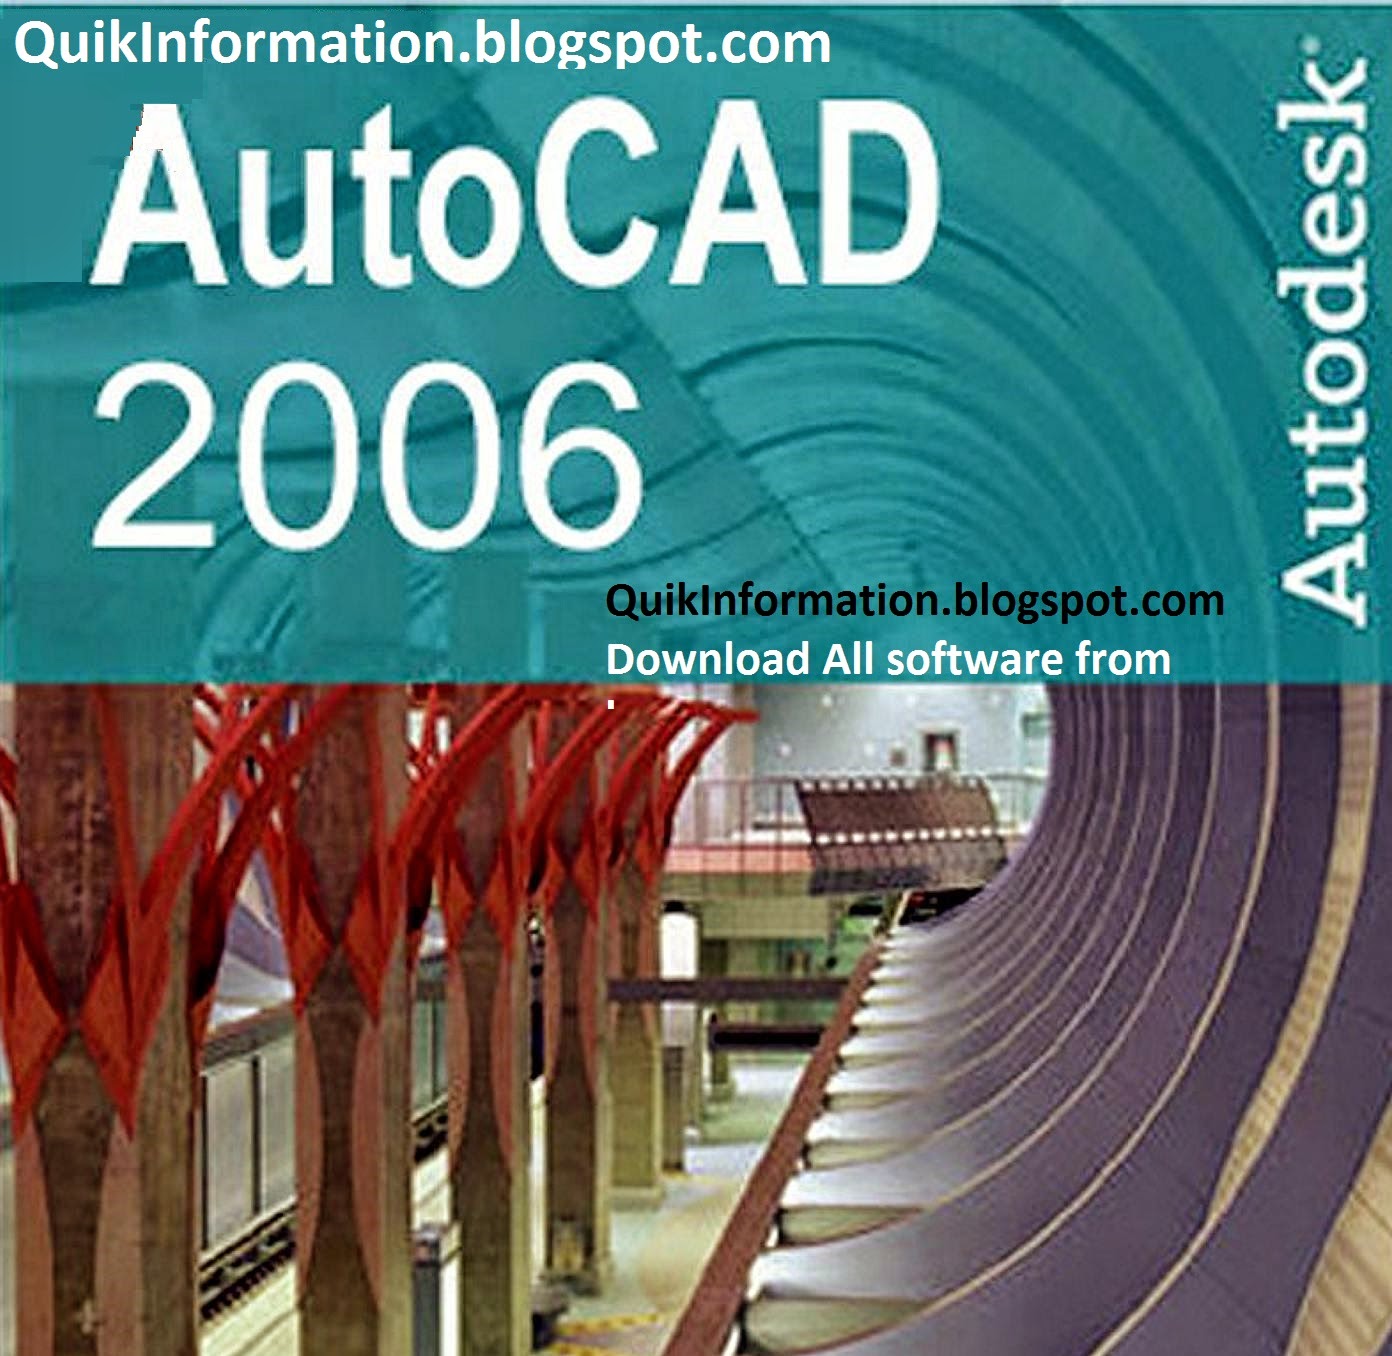 solidworks 2005 free download full version